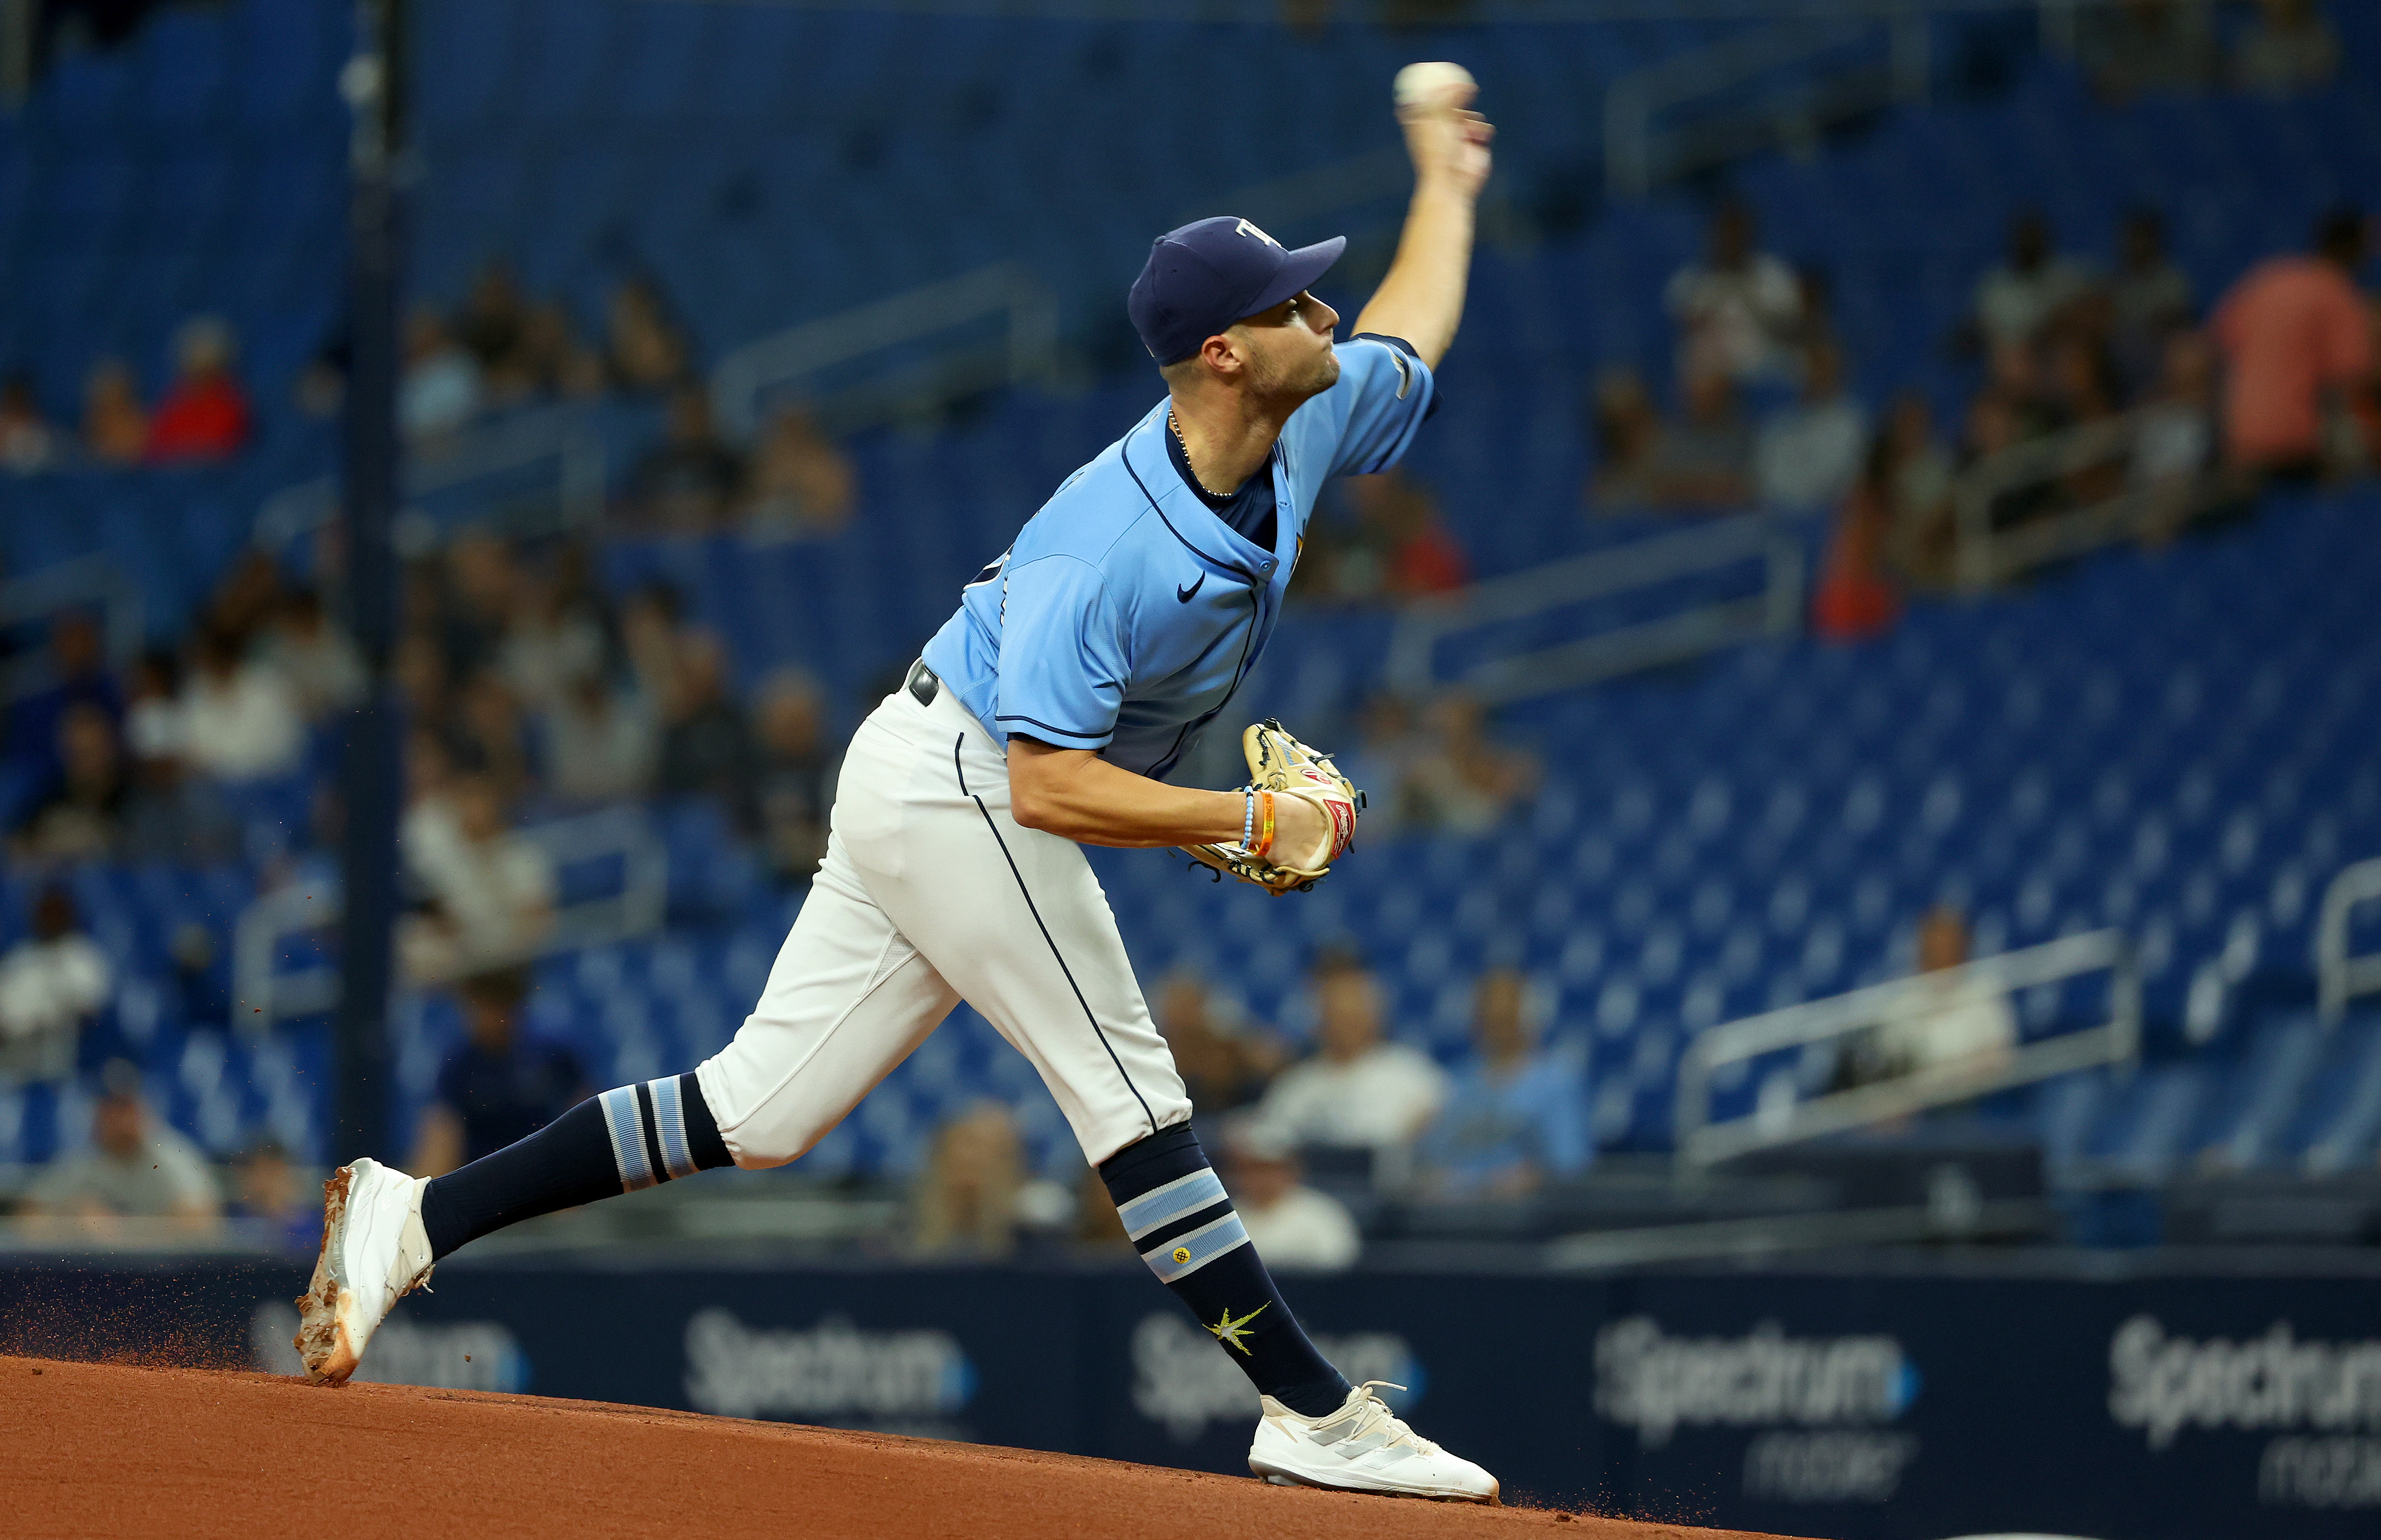 Shane McClanahan #18 of the Tampa Bay Rays pitches during a game against the Los Angeles Angels at Tropicana Field on August 24, 2022 in St Petersburg, Florida.